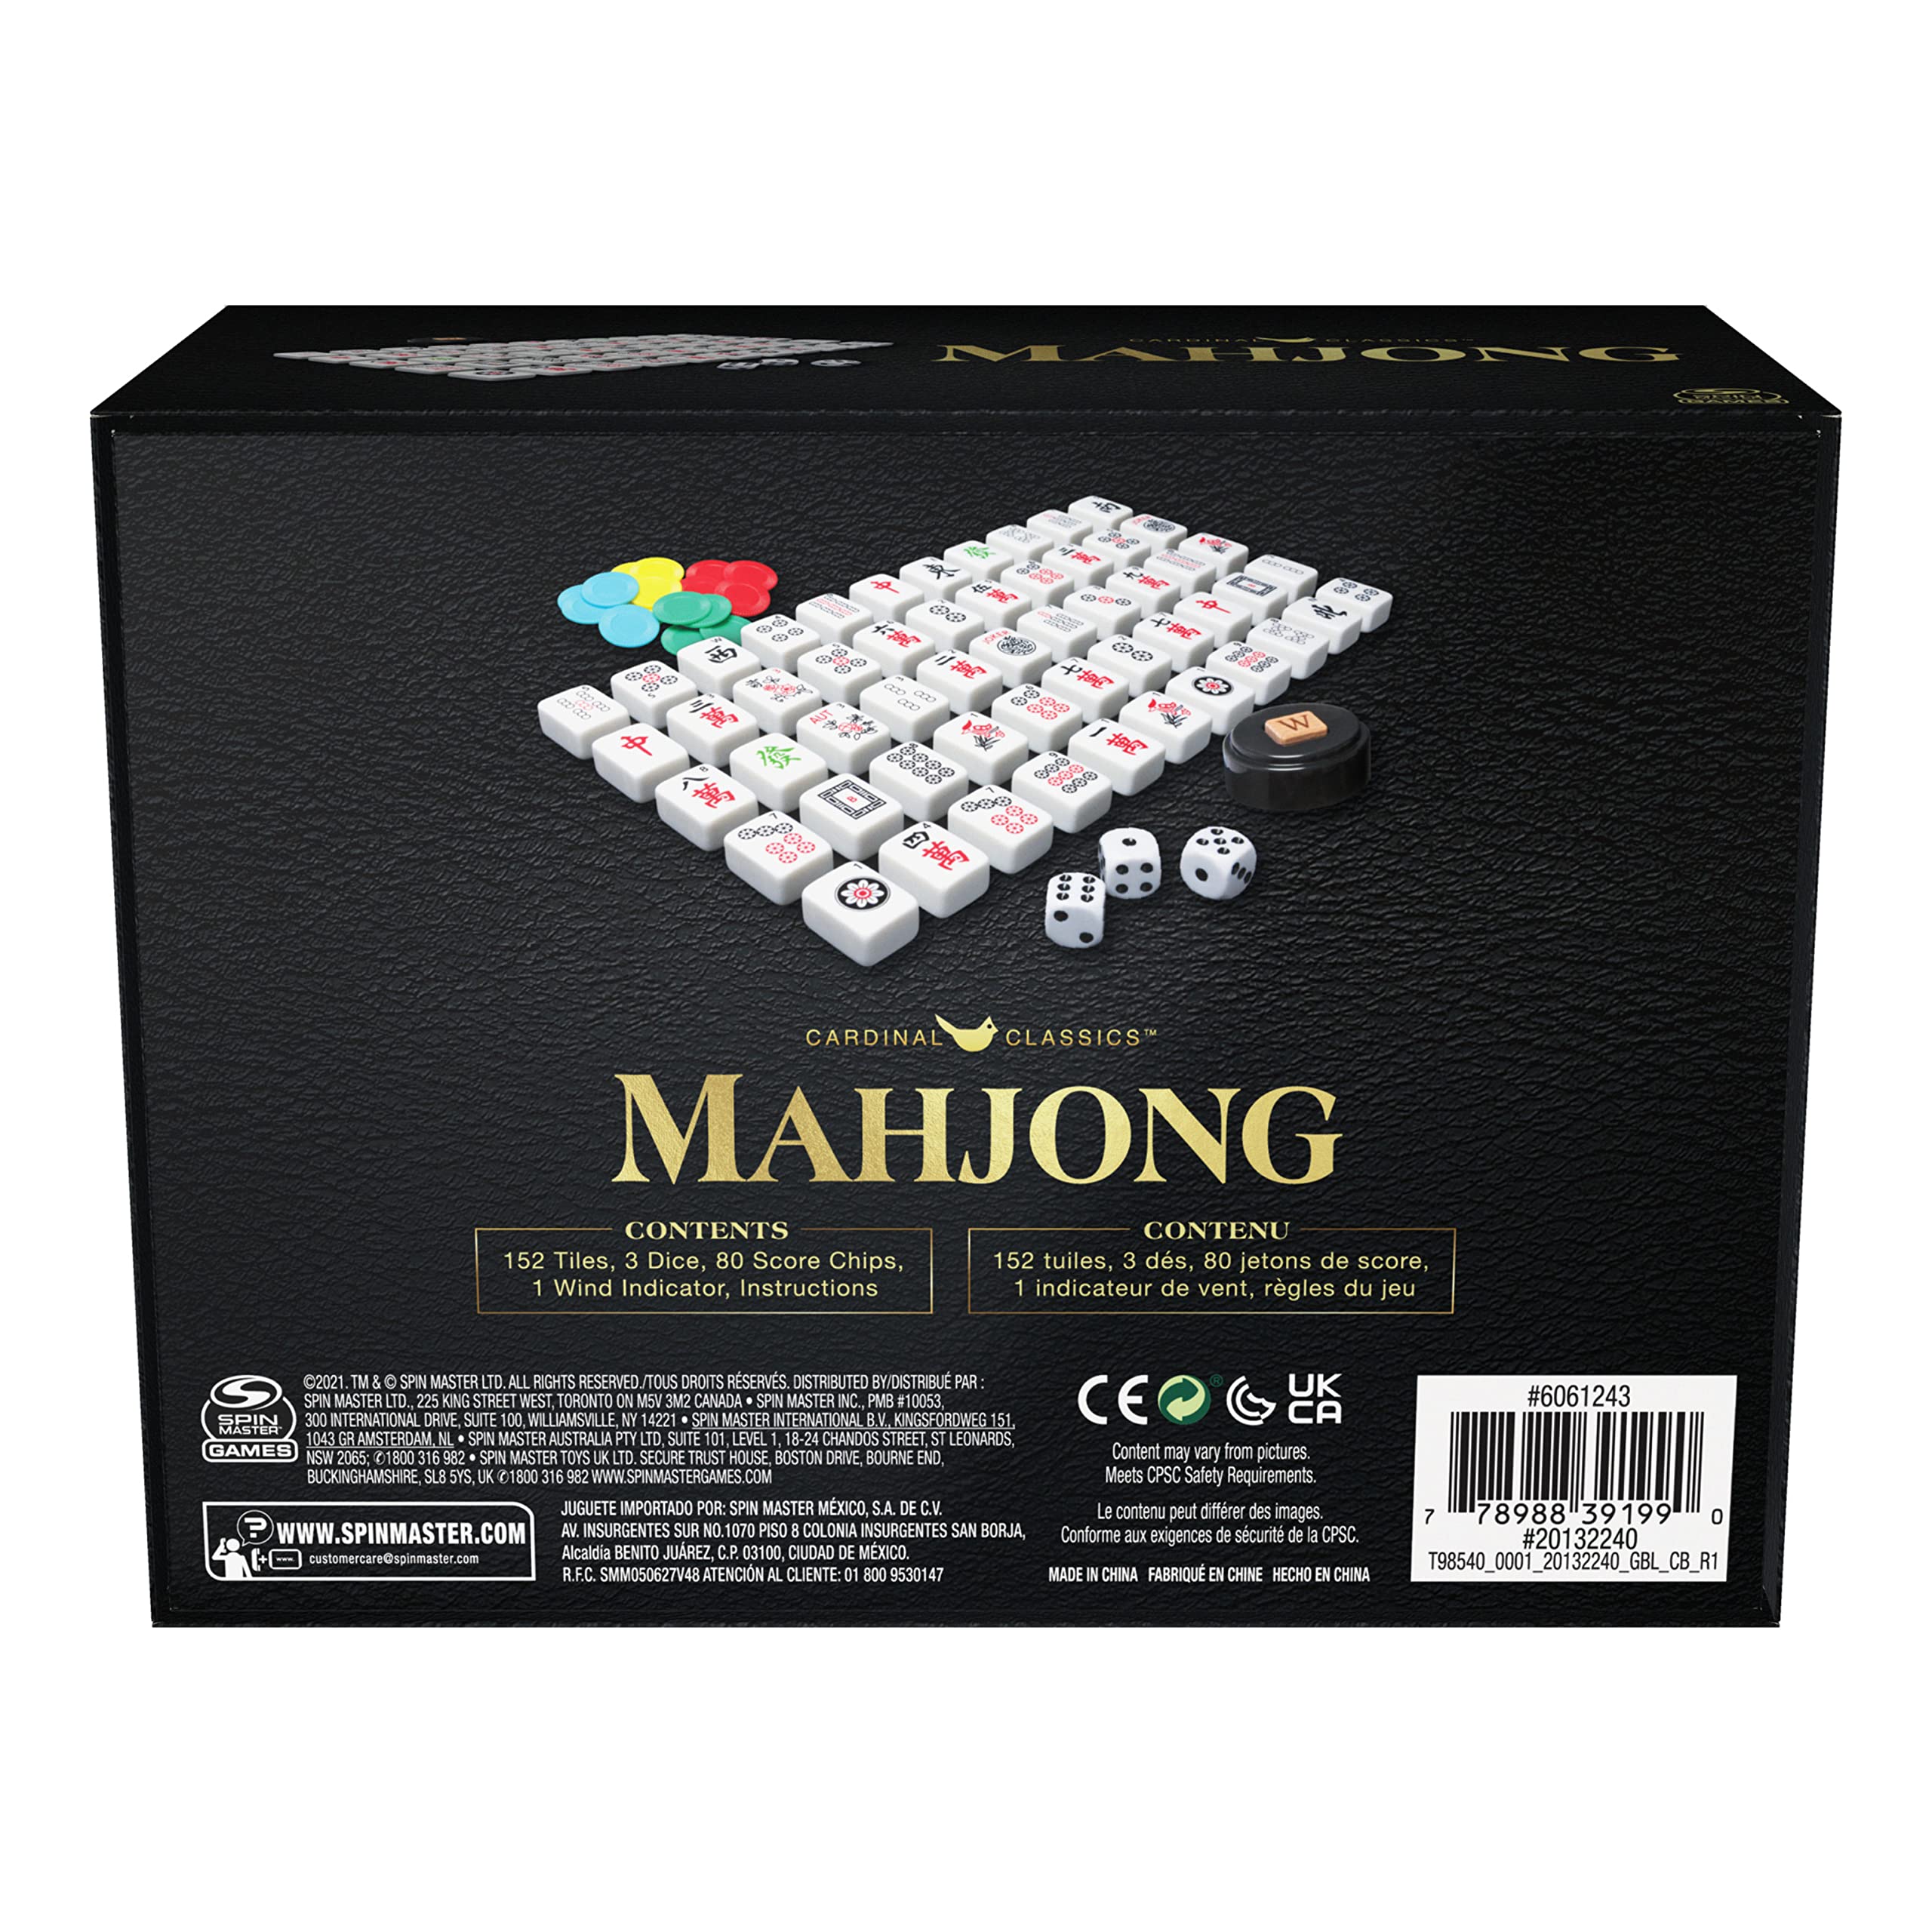 Mah Jong Classic Strategy Game for Kids, Families, and Adults Ages 8 and up